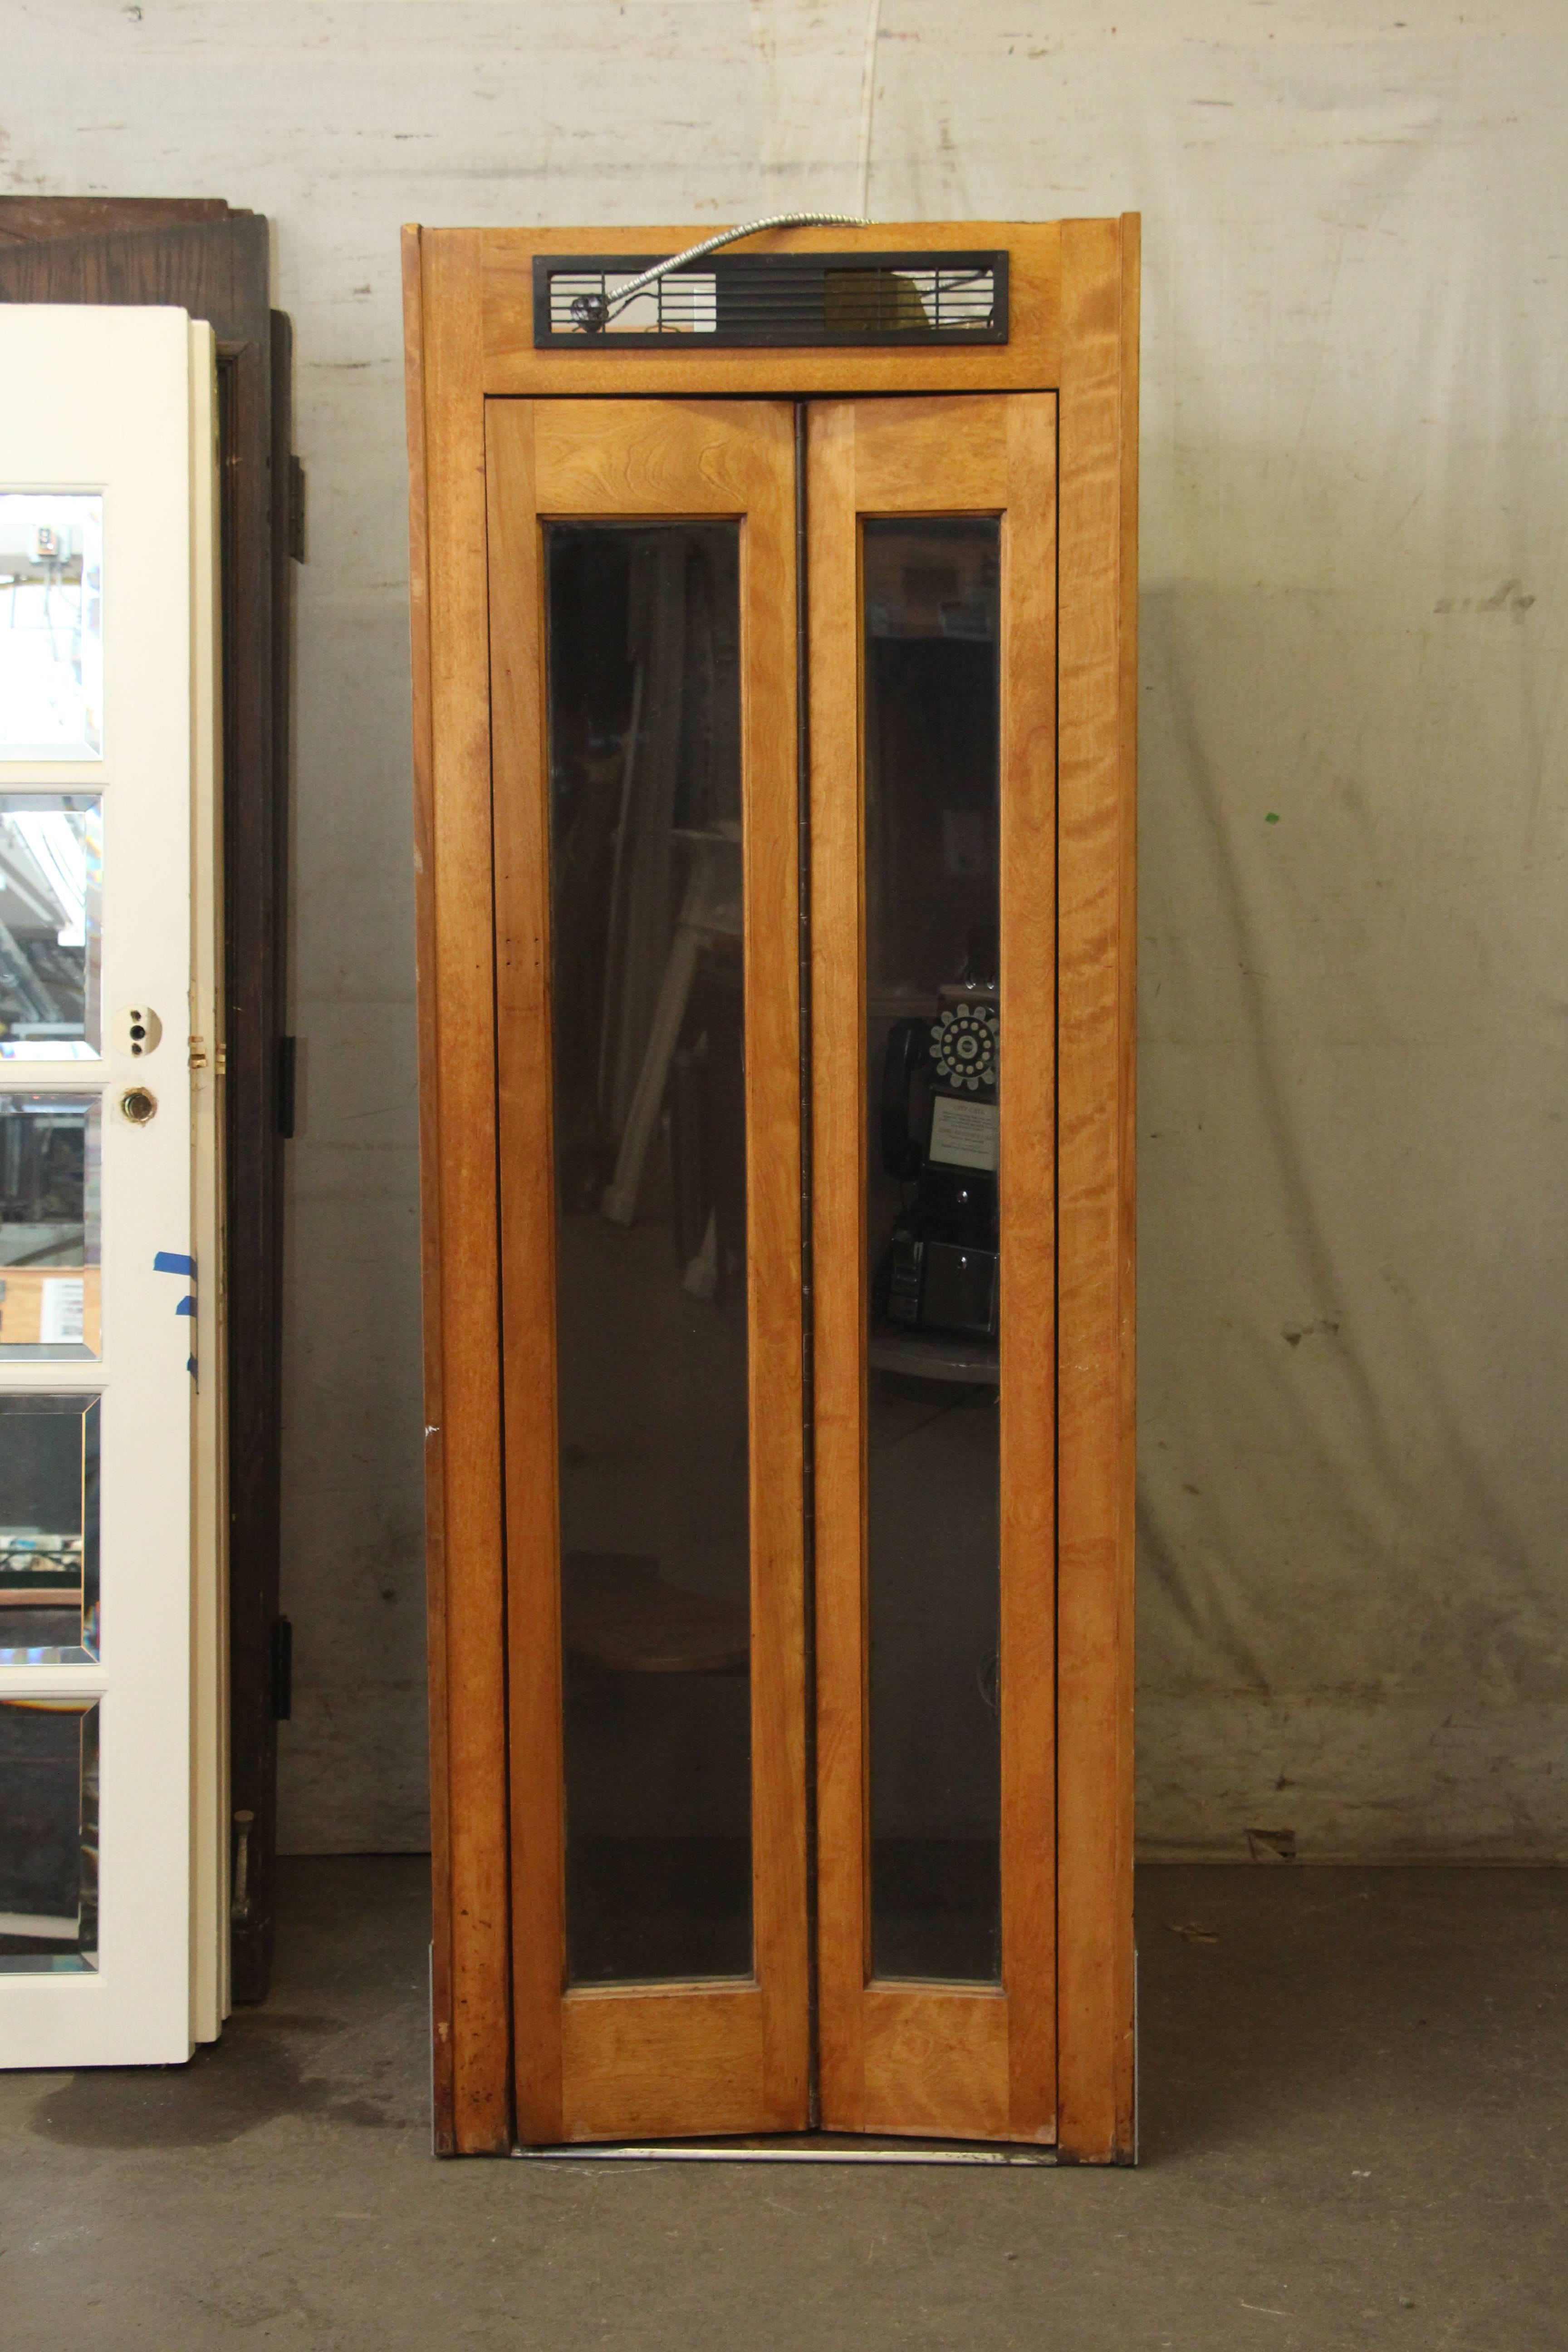 Industrial 1950s Wooden Phone Booth with Rotary Dial Phone